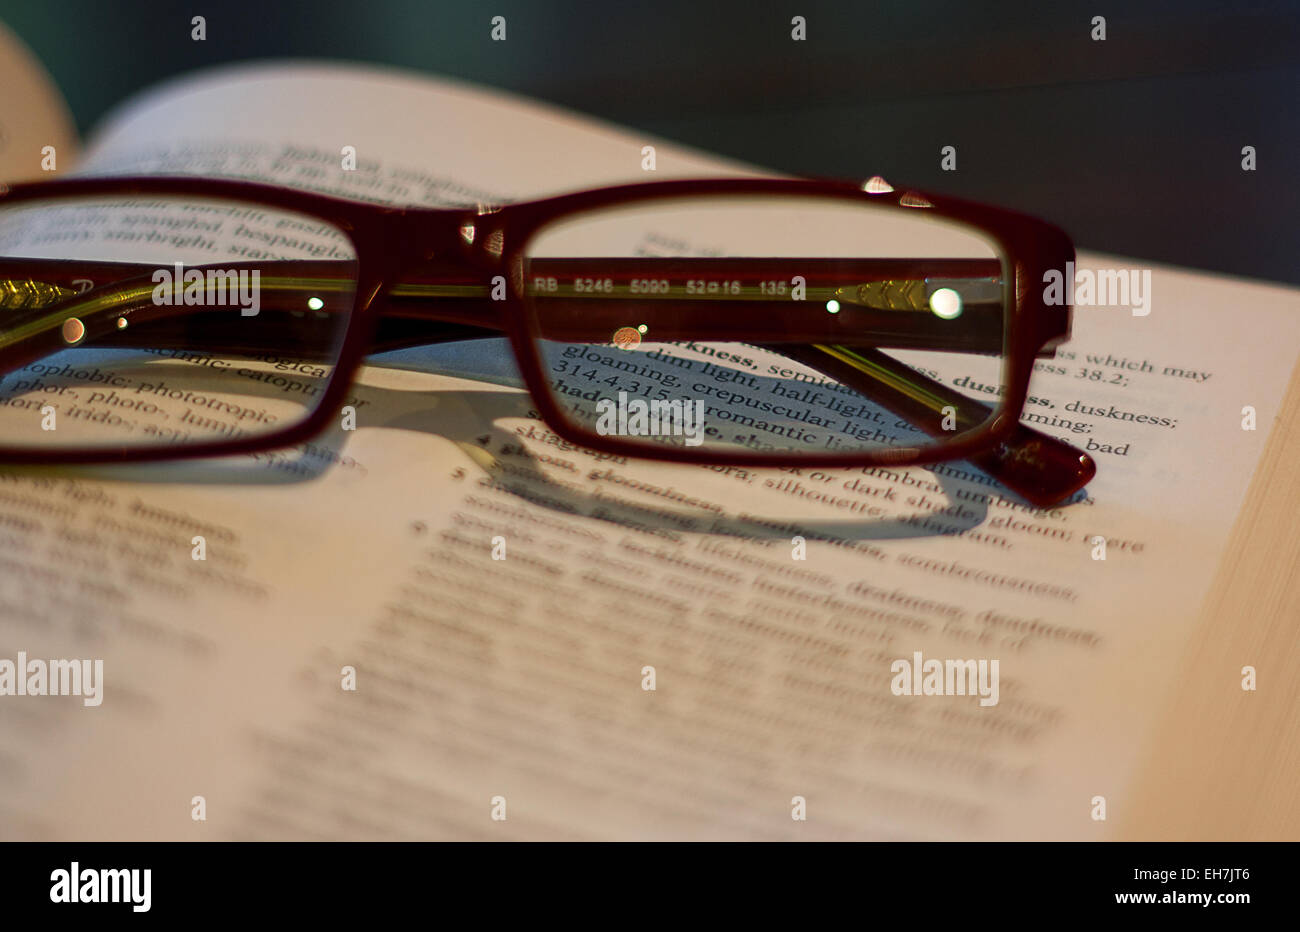 Reading glasses on a thesaurus focused on the words through the lens. Stock Photo